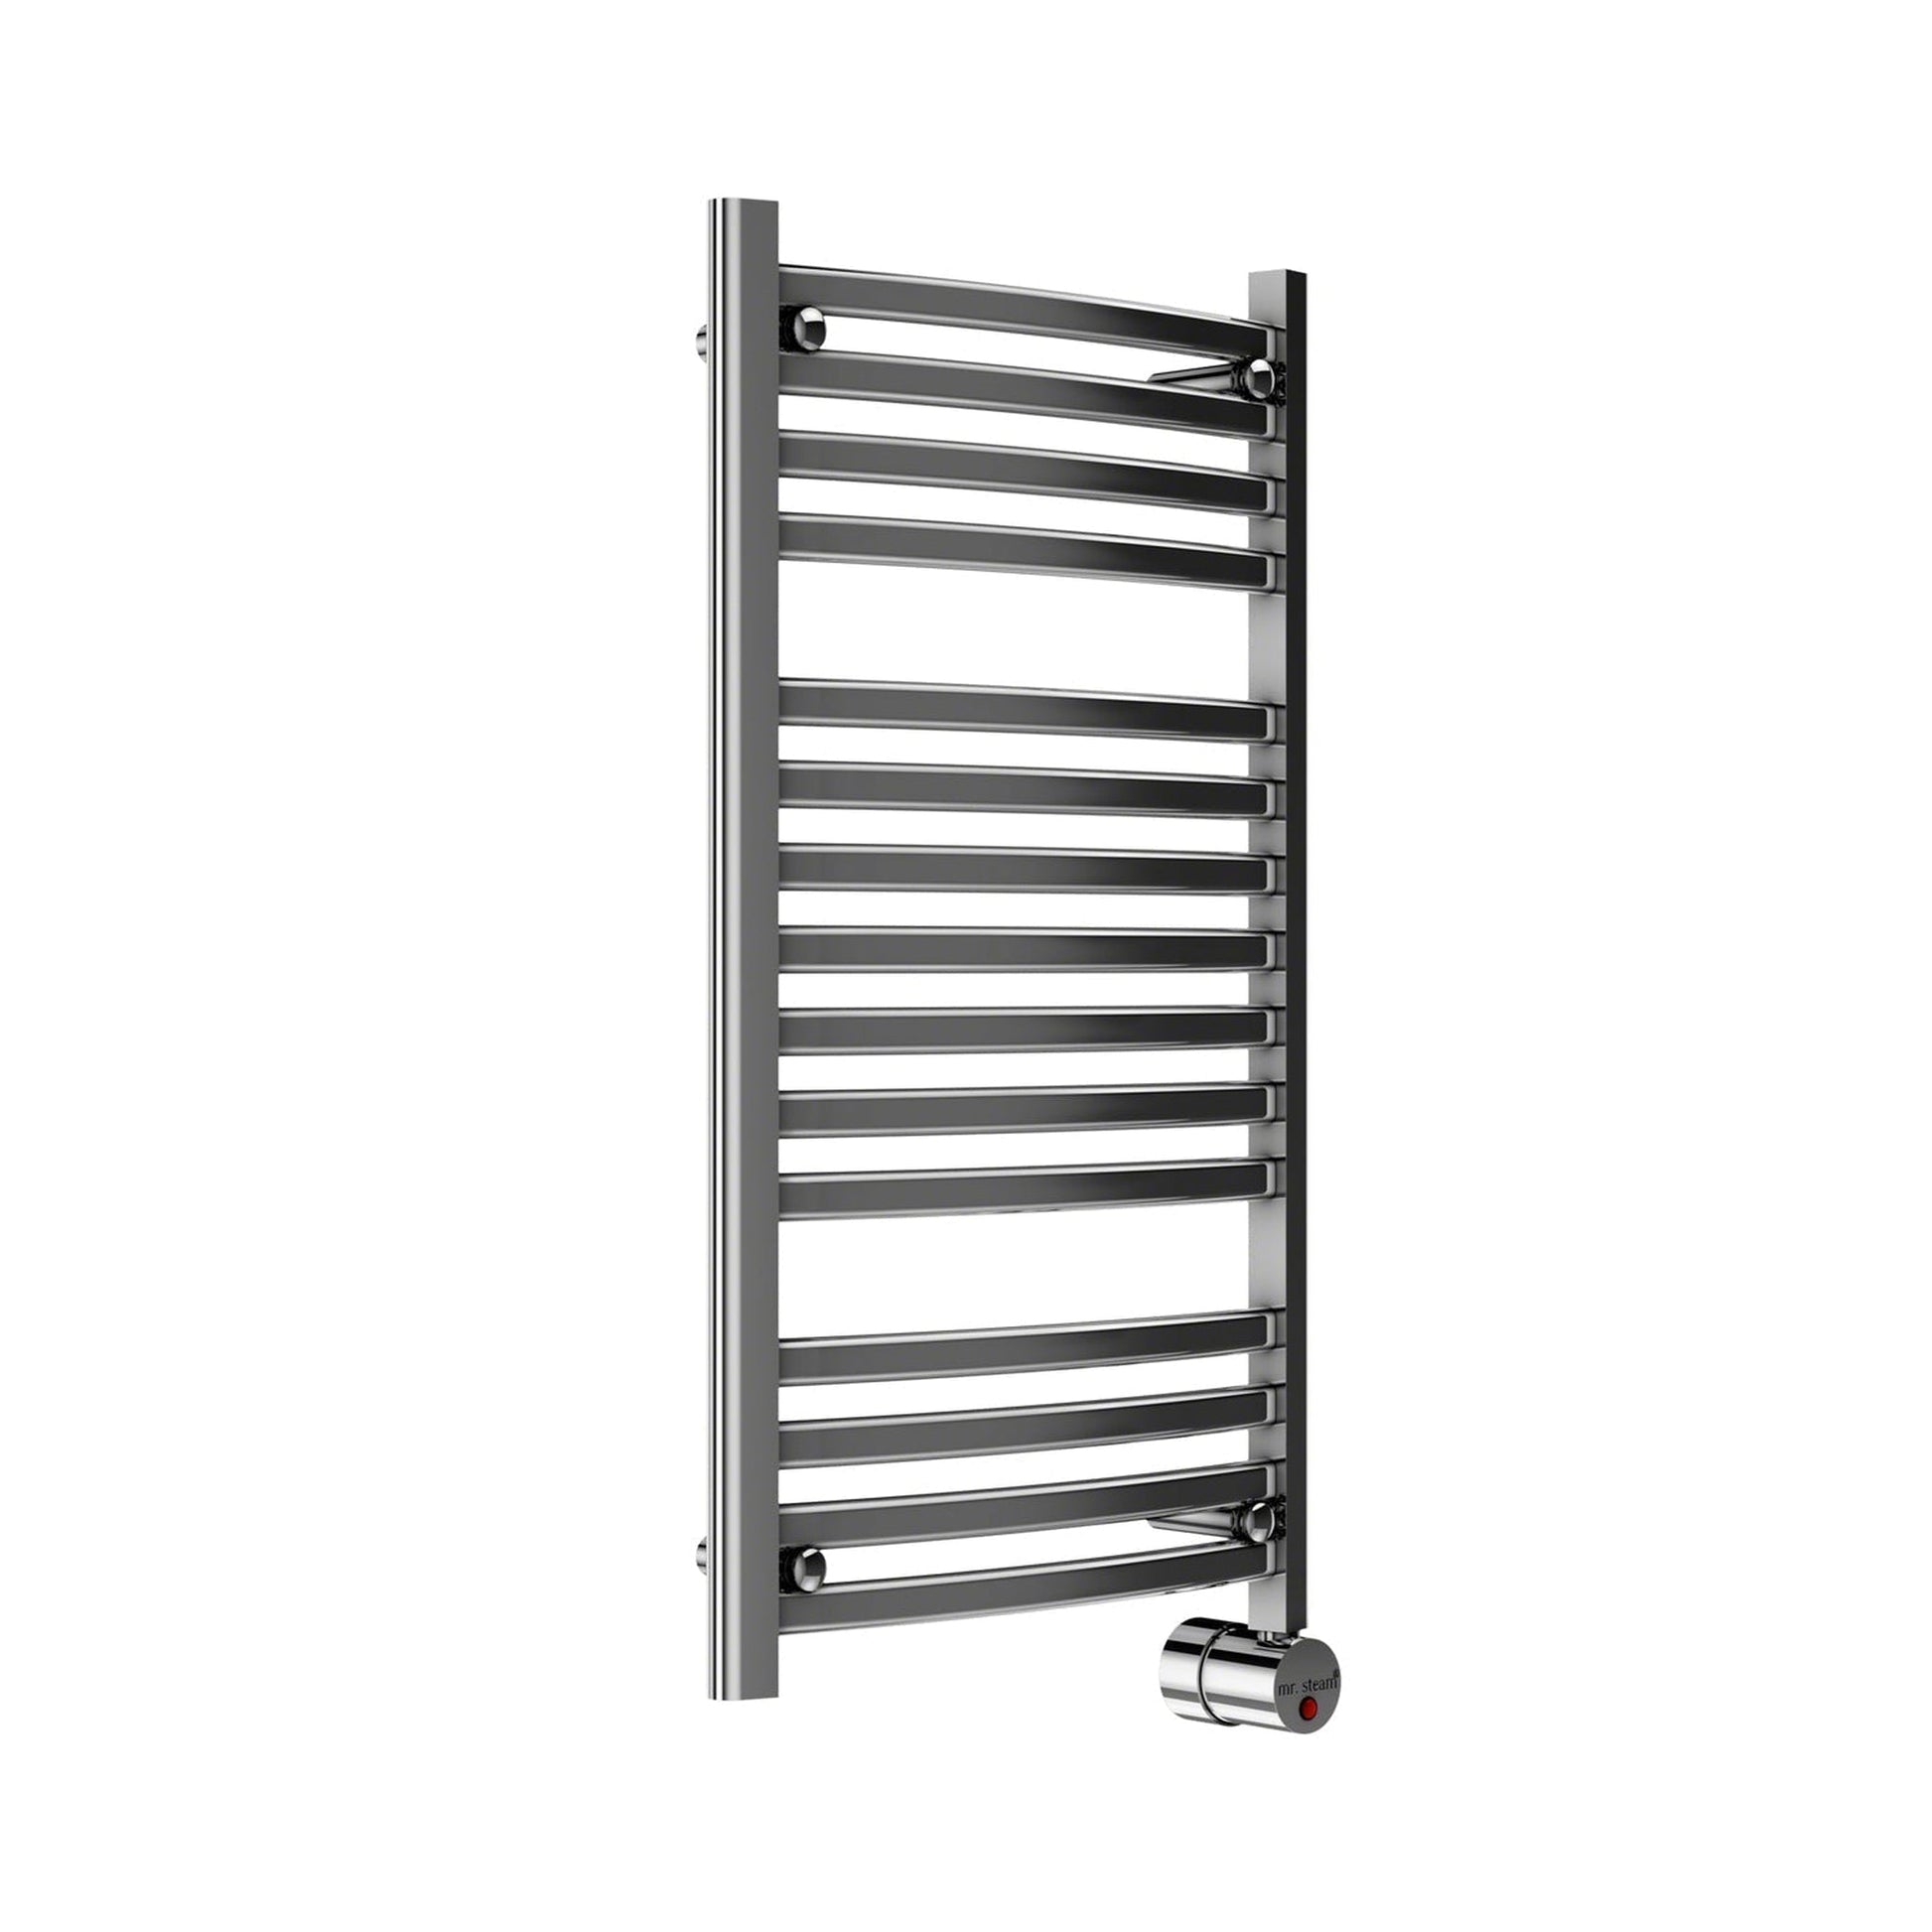 MrSteam Broadway Collection 20" x 36" 13-Bar Polished Chrome Hardwired Wall-Mounted Electric Towel Warmer With Digital Timer and Built-in Aromatherapy Oil Well